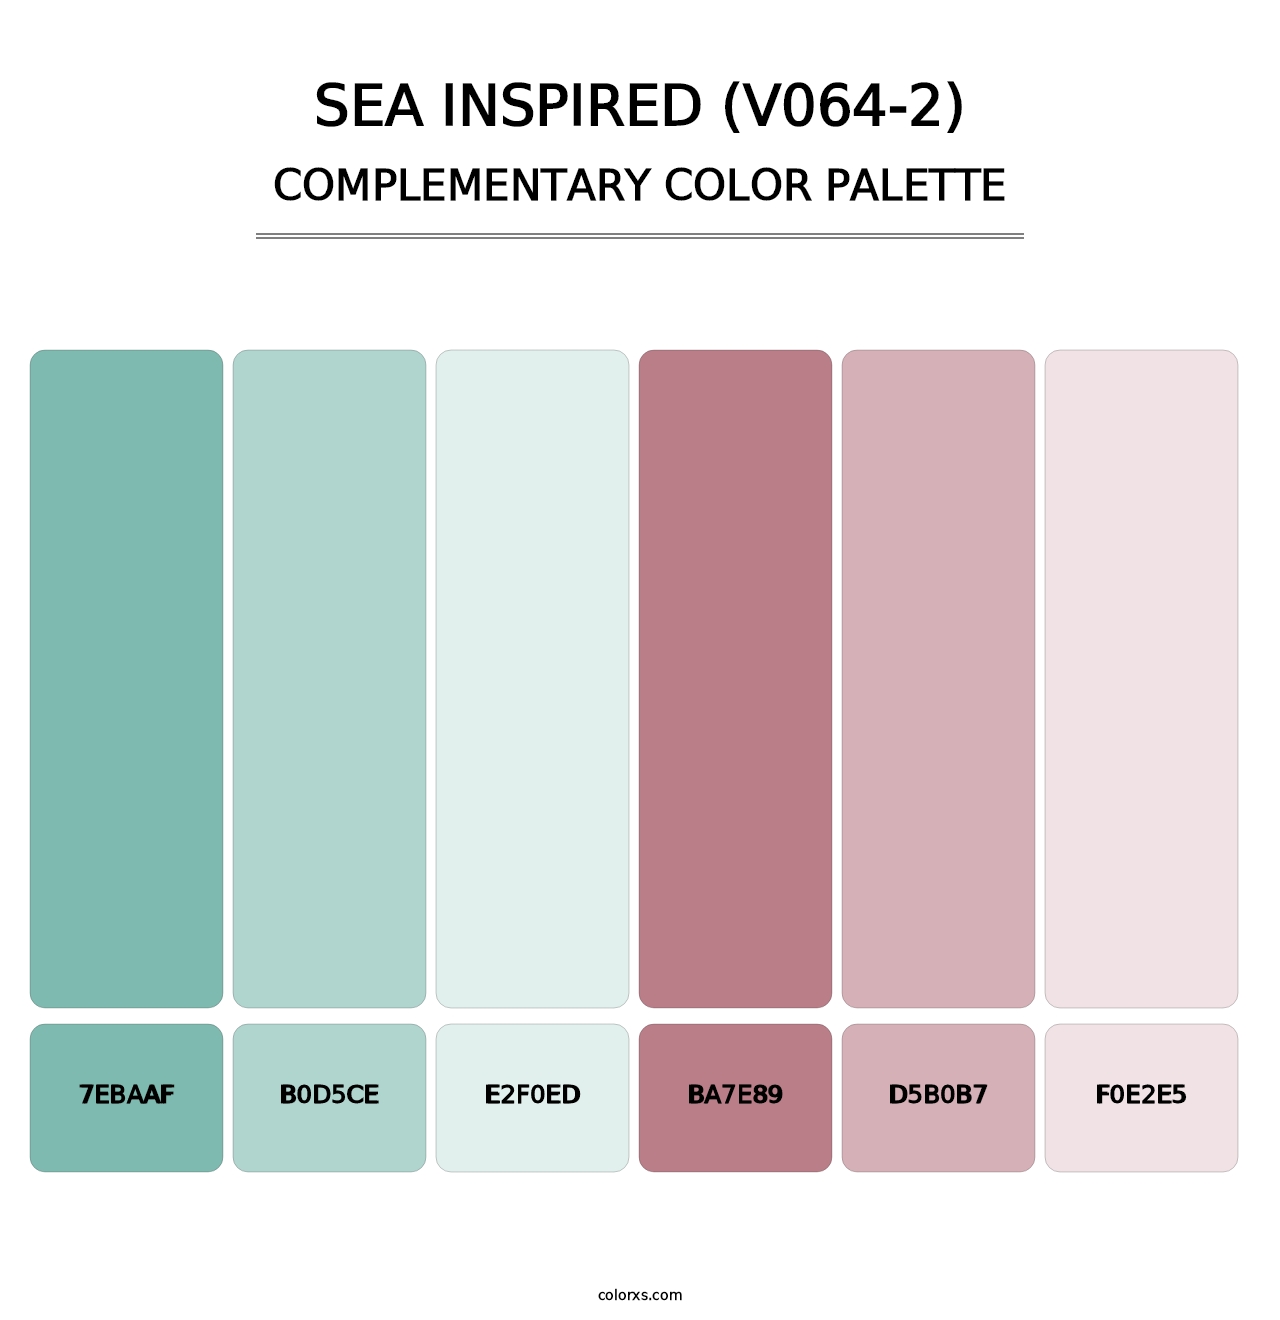 Sea Inspired (V064-2) - Complementary Color Palette